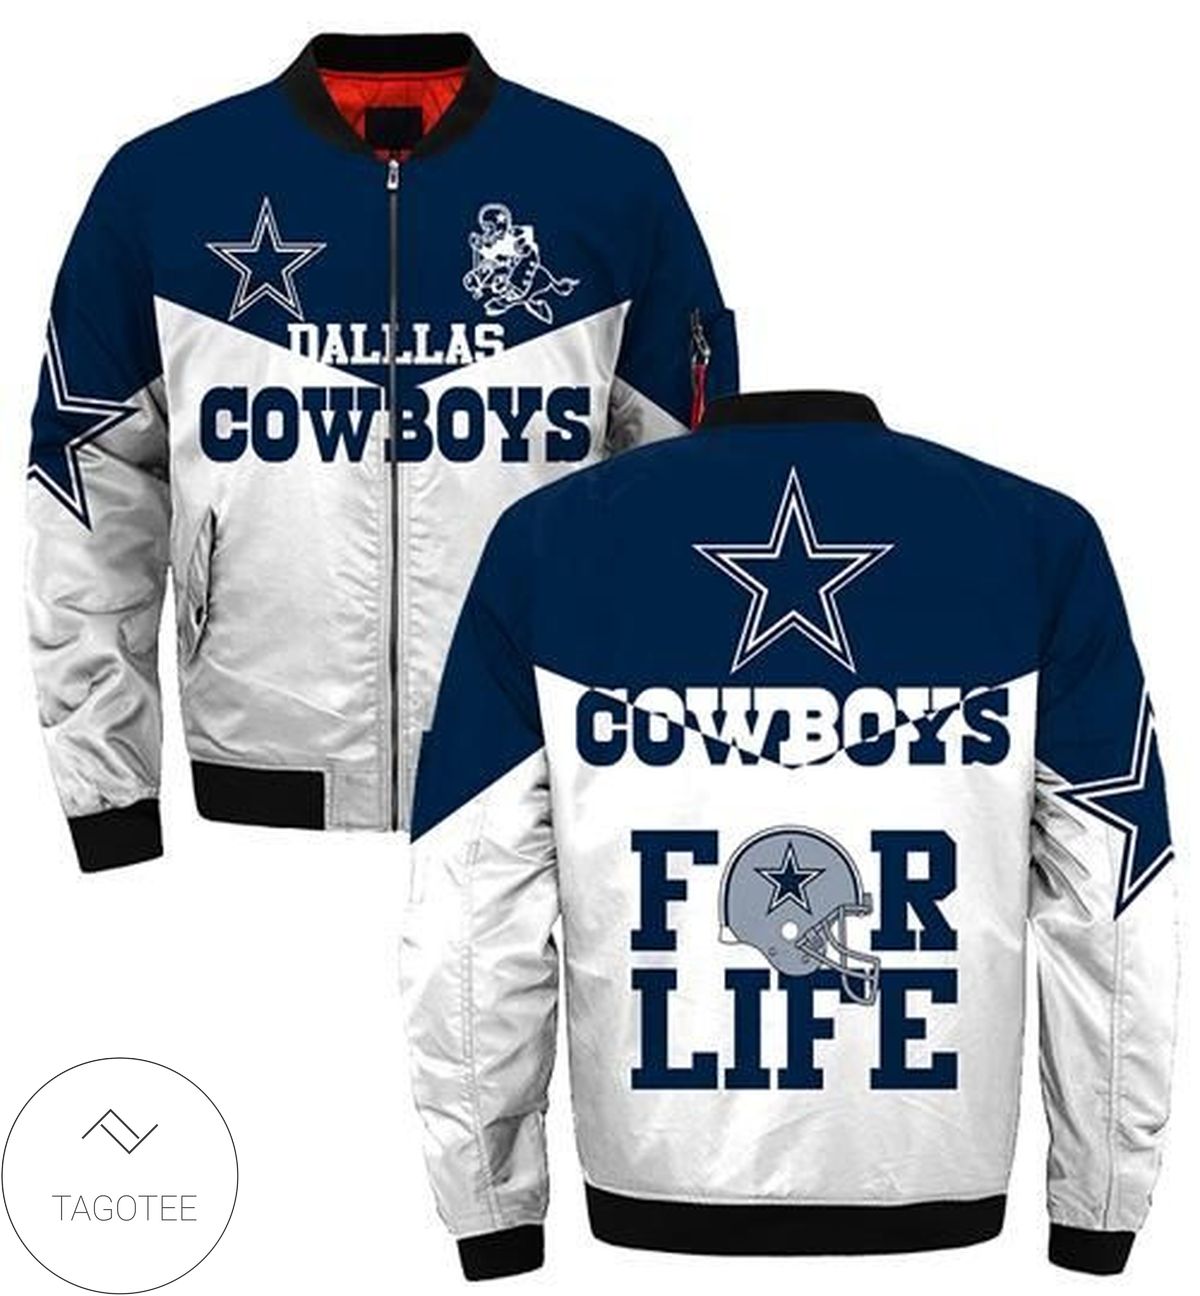 Dallas Cowboys White And Blue 3d Printed Unisex Bomber Jacket